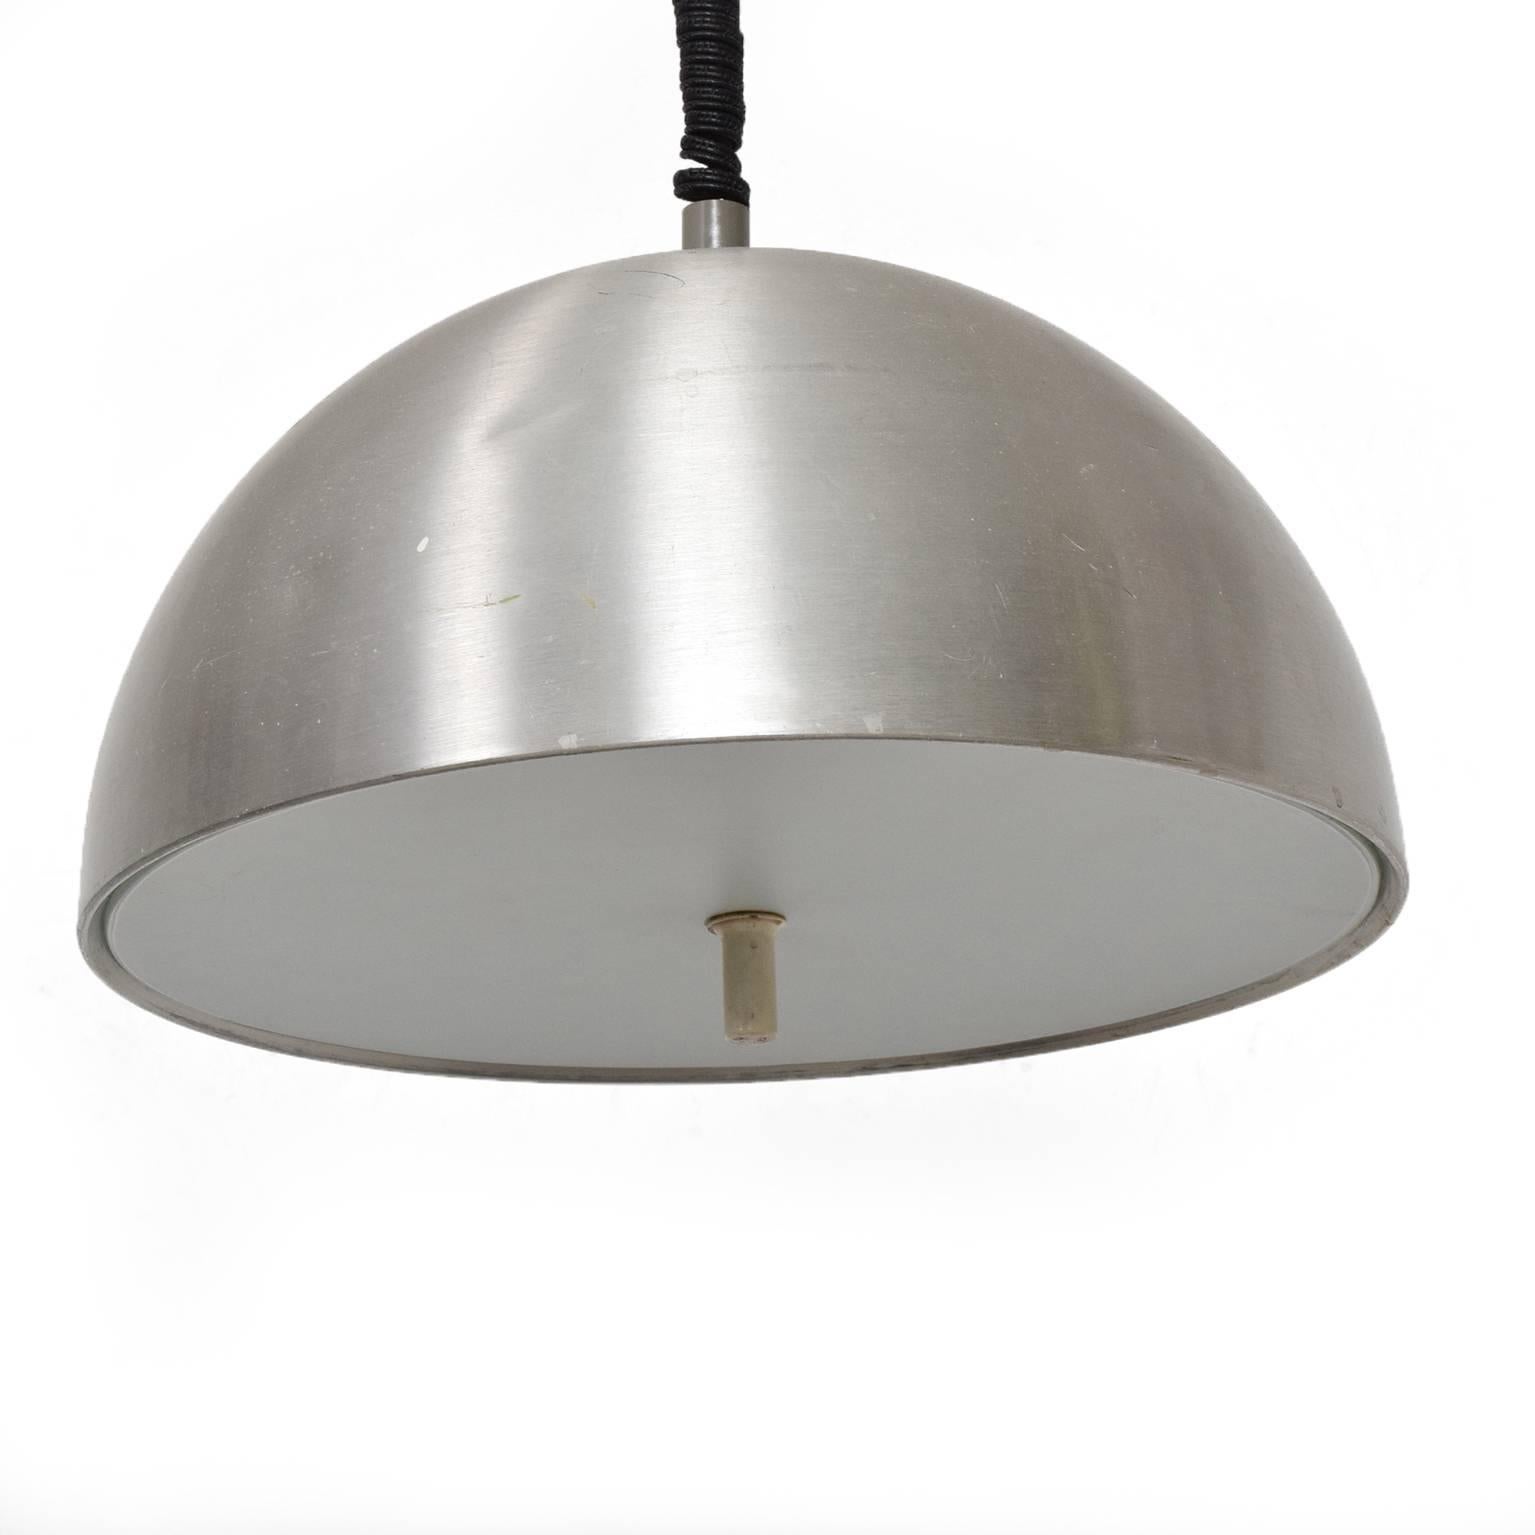 For your consideration, a Mid-Century Modern Italian pendant light aluminum adjustable, 
Italy, circa the late 1960s. Unmarked. 
Dimensions: 29